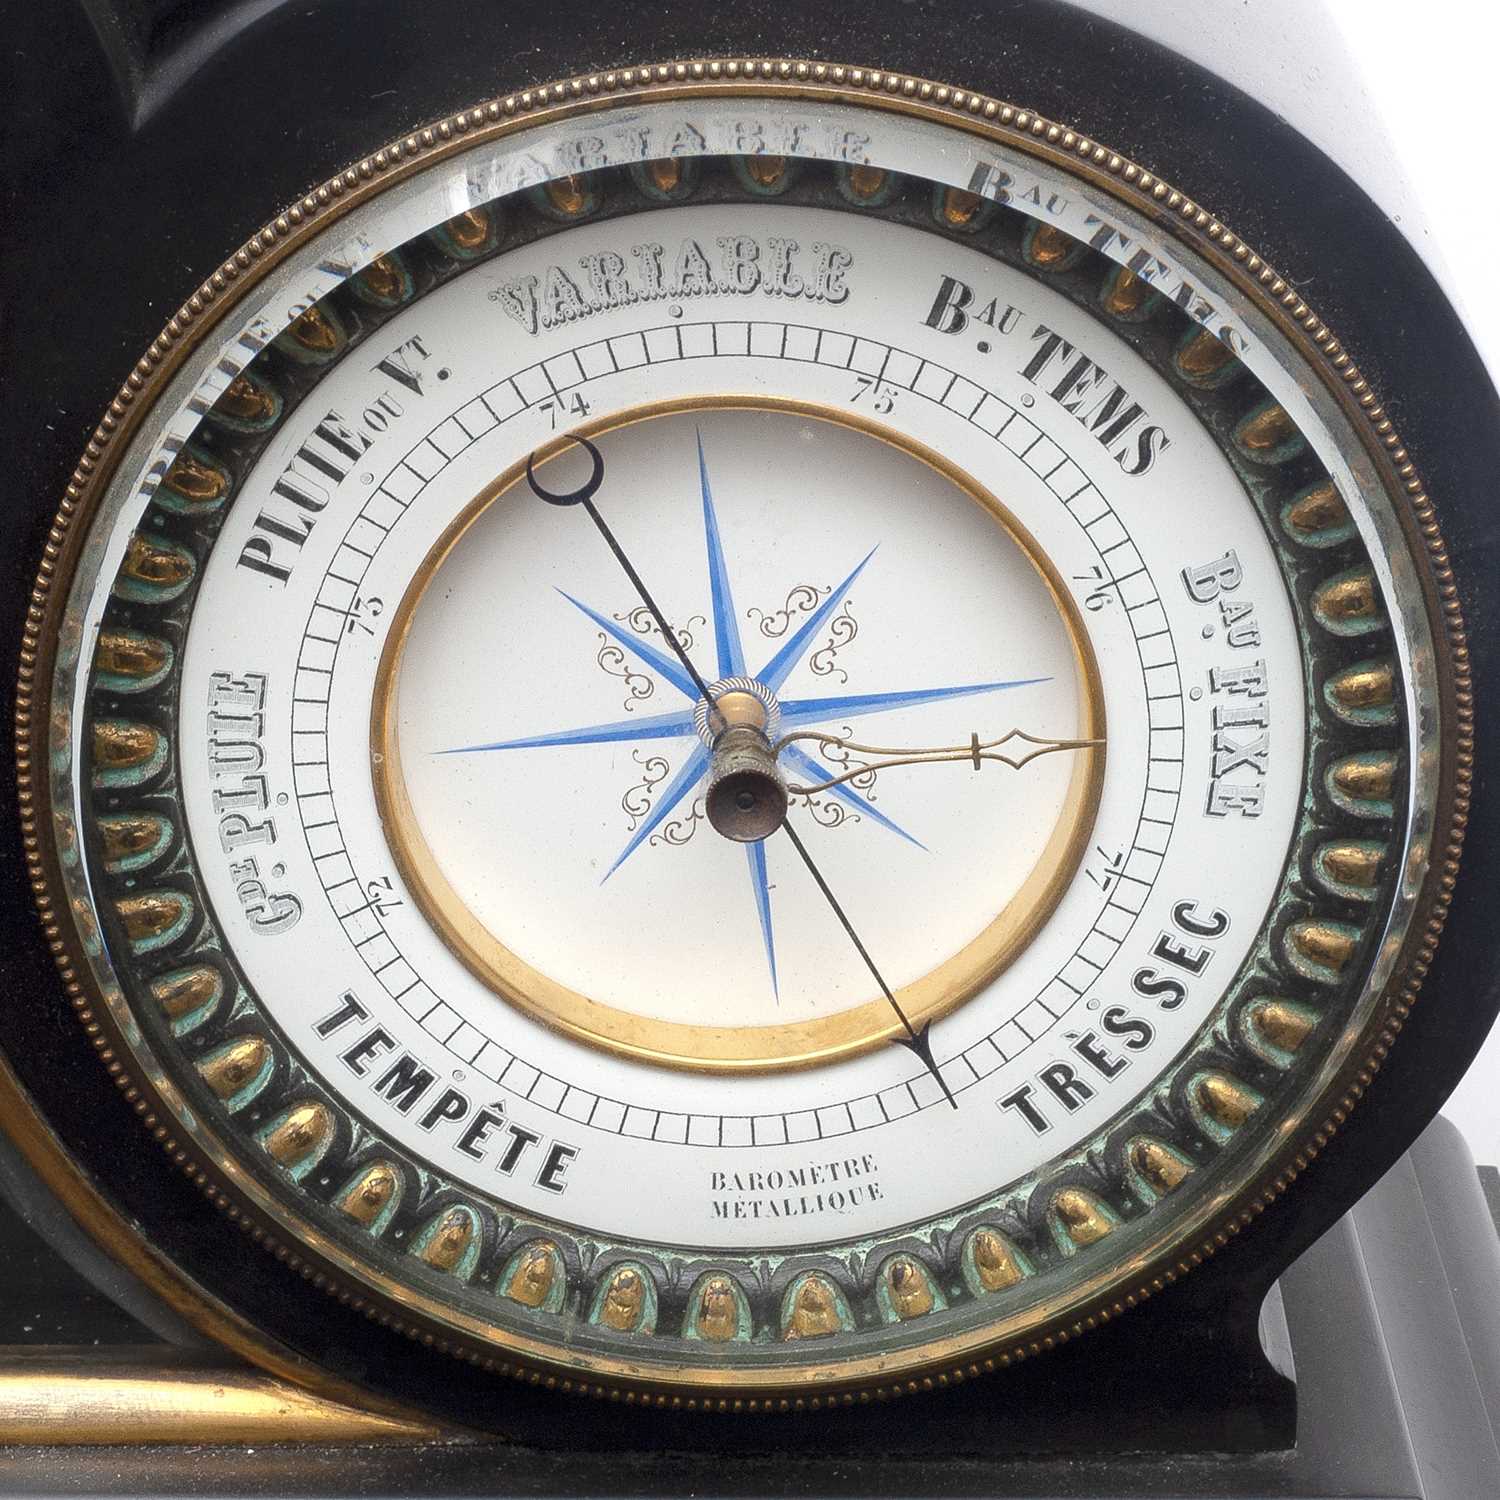 AN IMPRESSIVE 19TH CENTURY FRENCH PERPETUAL CALENDAR CLOCK WITH MOONPHASE AND BAROMETER - Image 5 of 6